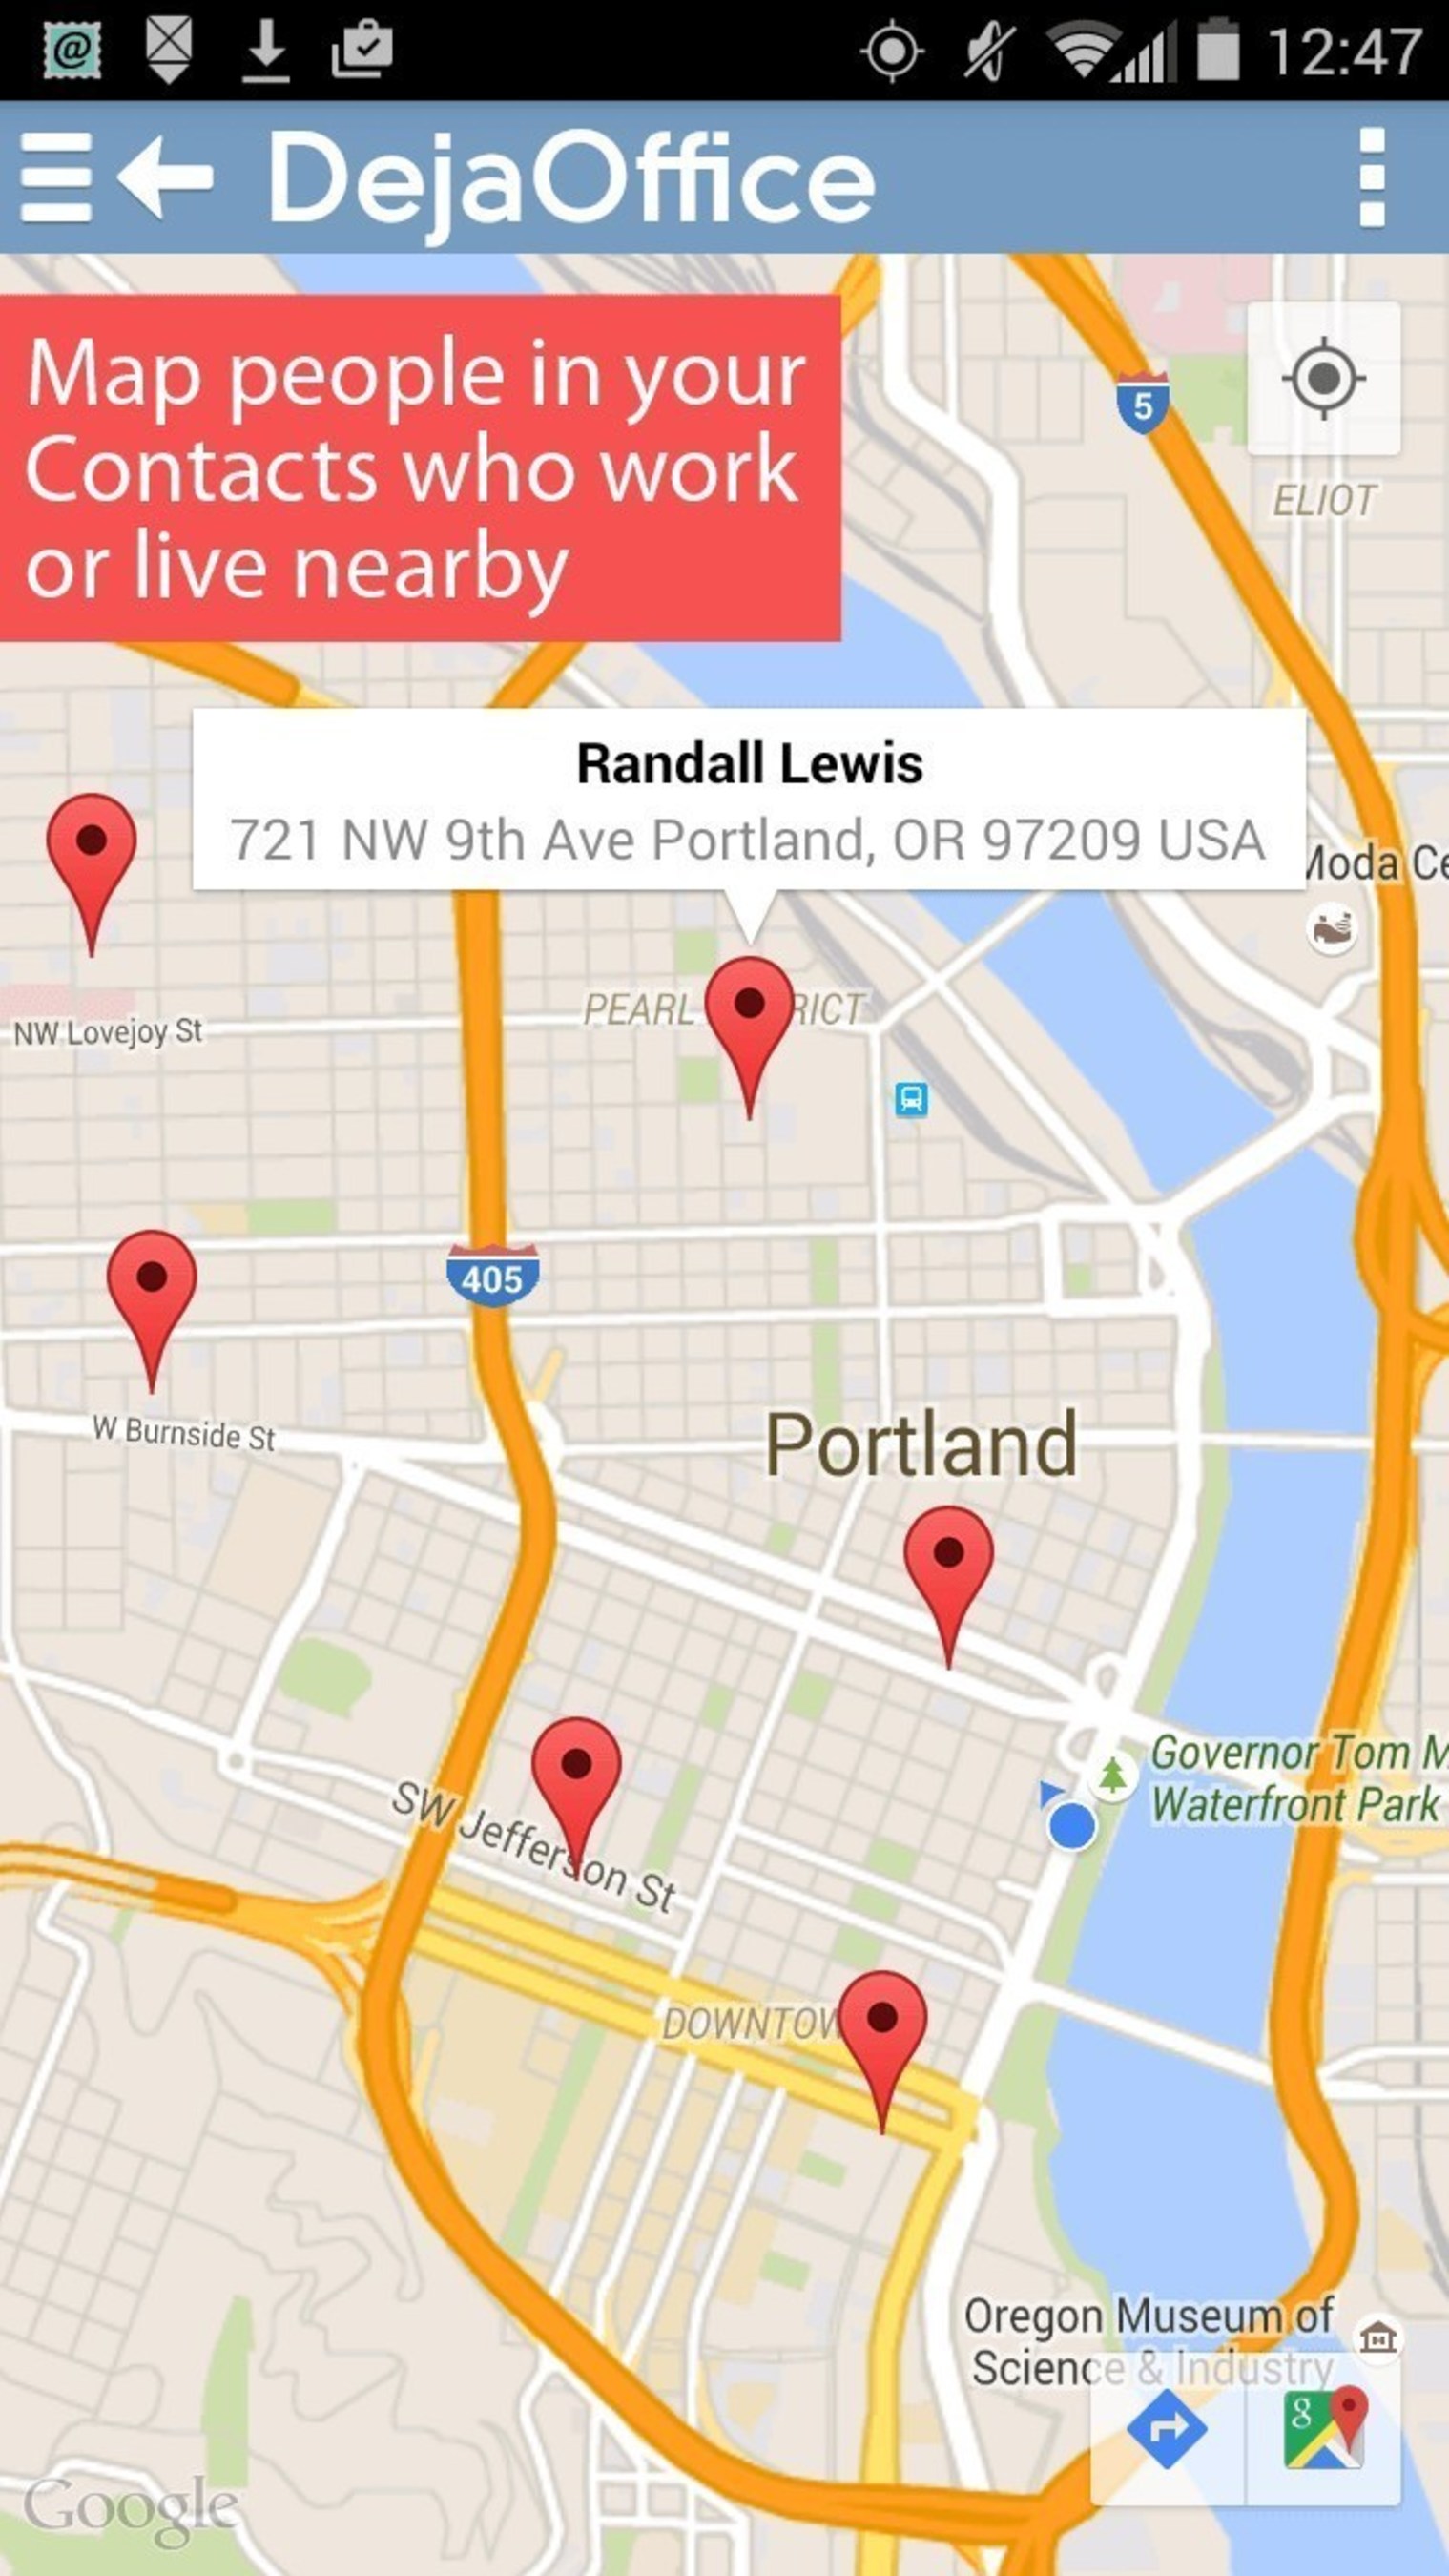 Map people in your Contacts who work or live nearby